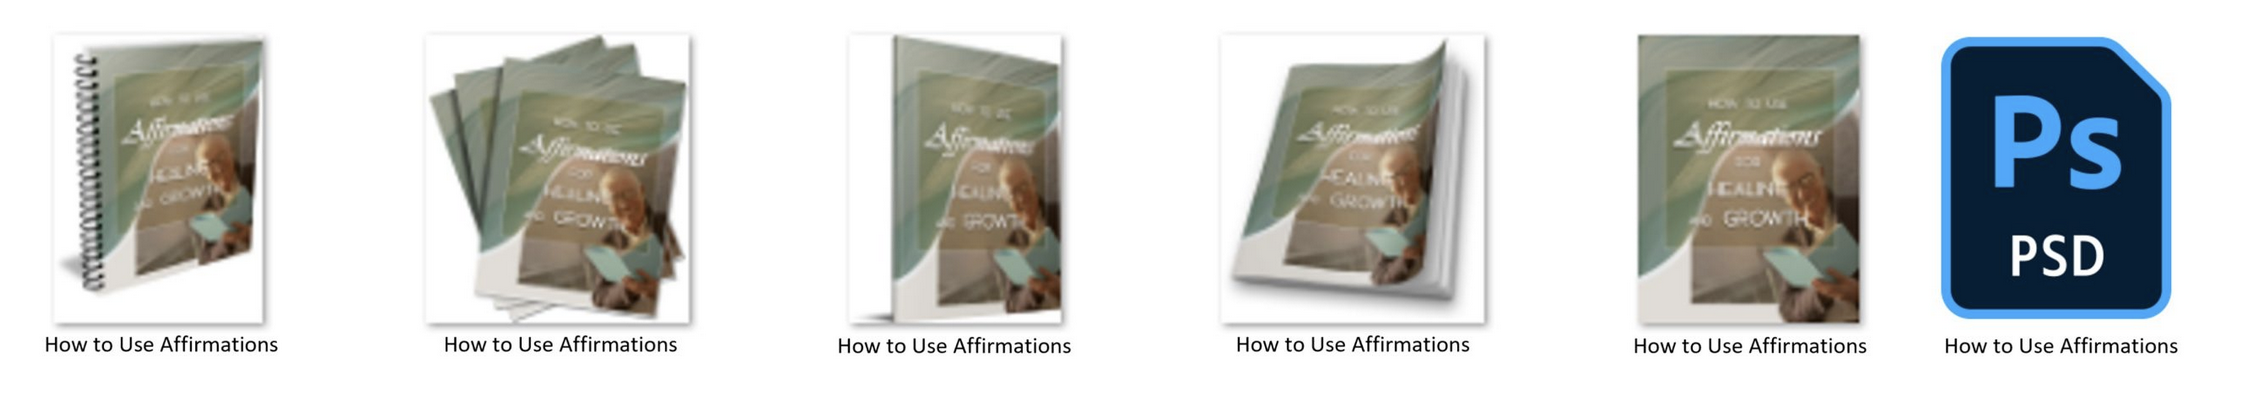 Healing Affirmations PLR Report Cover